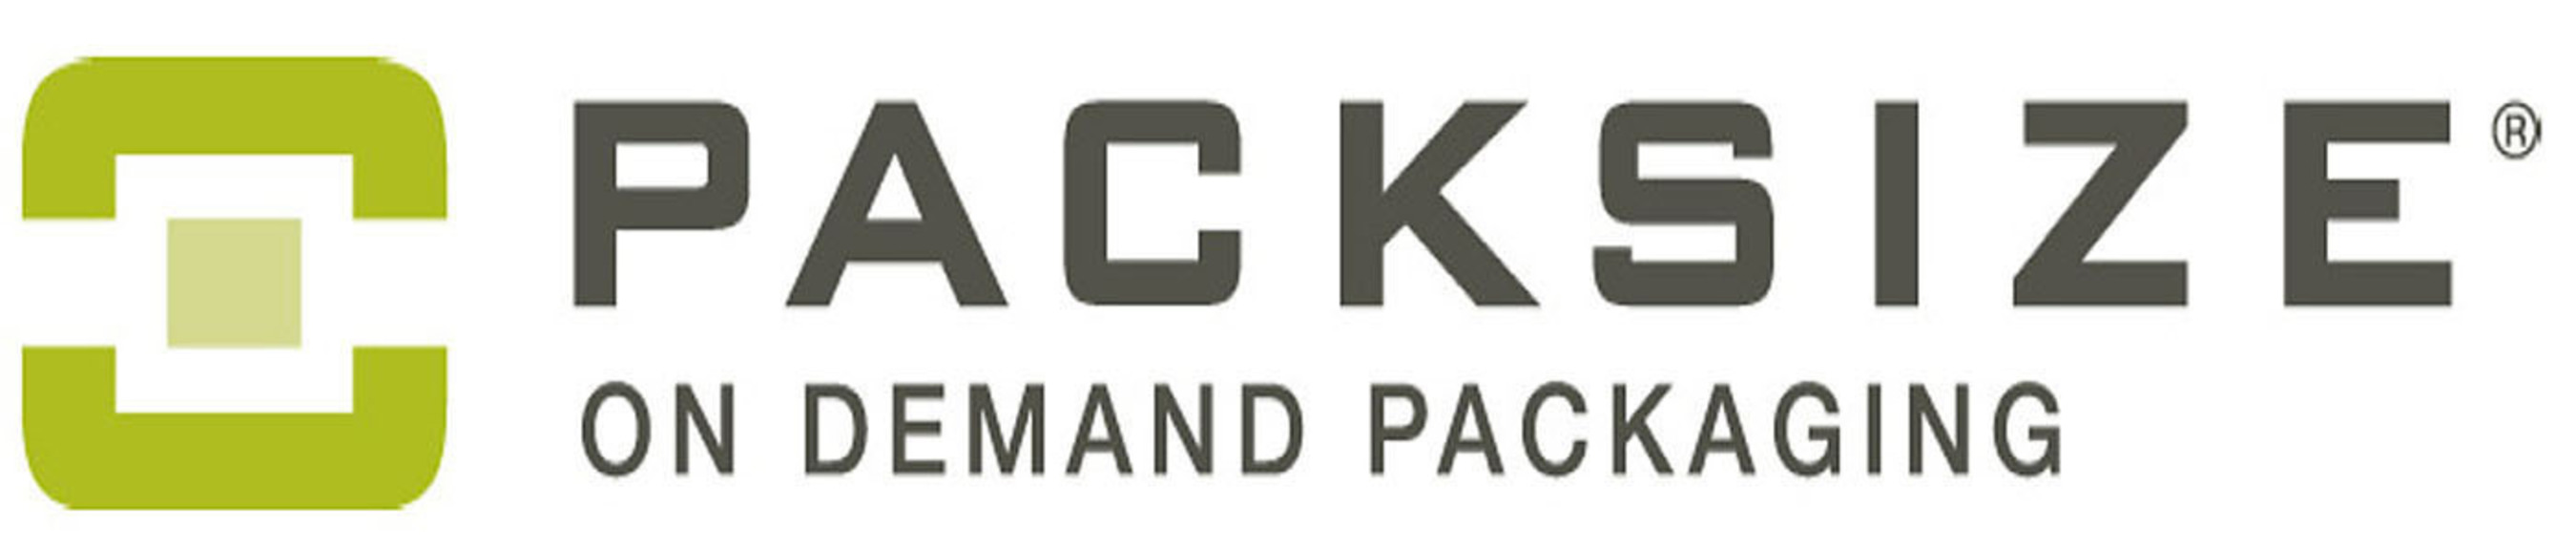 Packsize makes it easy with On Demand Packaging ( http://www.packsize.com/on-demand ), a revolutionary packaging system that lets companies produce the right-sized box exactly when they need it. (PRNewsFoto/Packsize International LLC) (PRNewsFoto/)